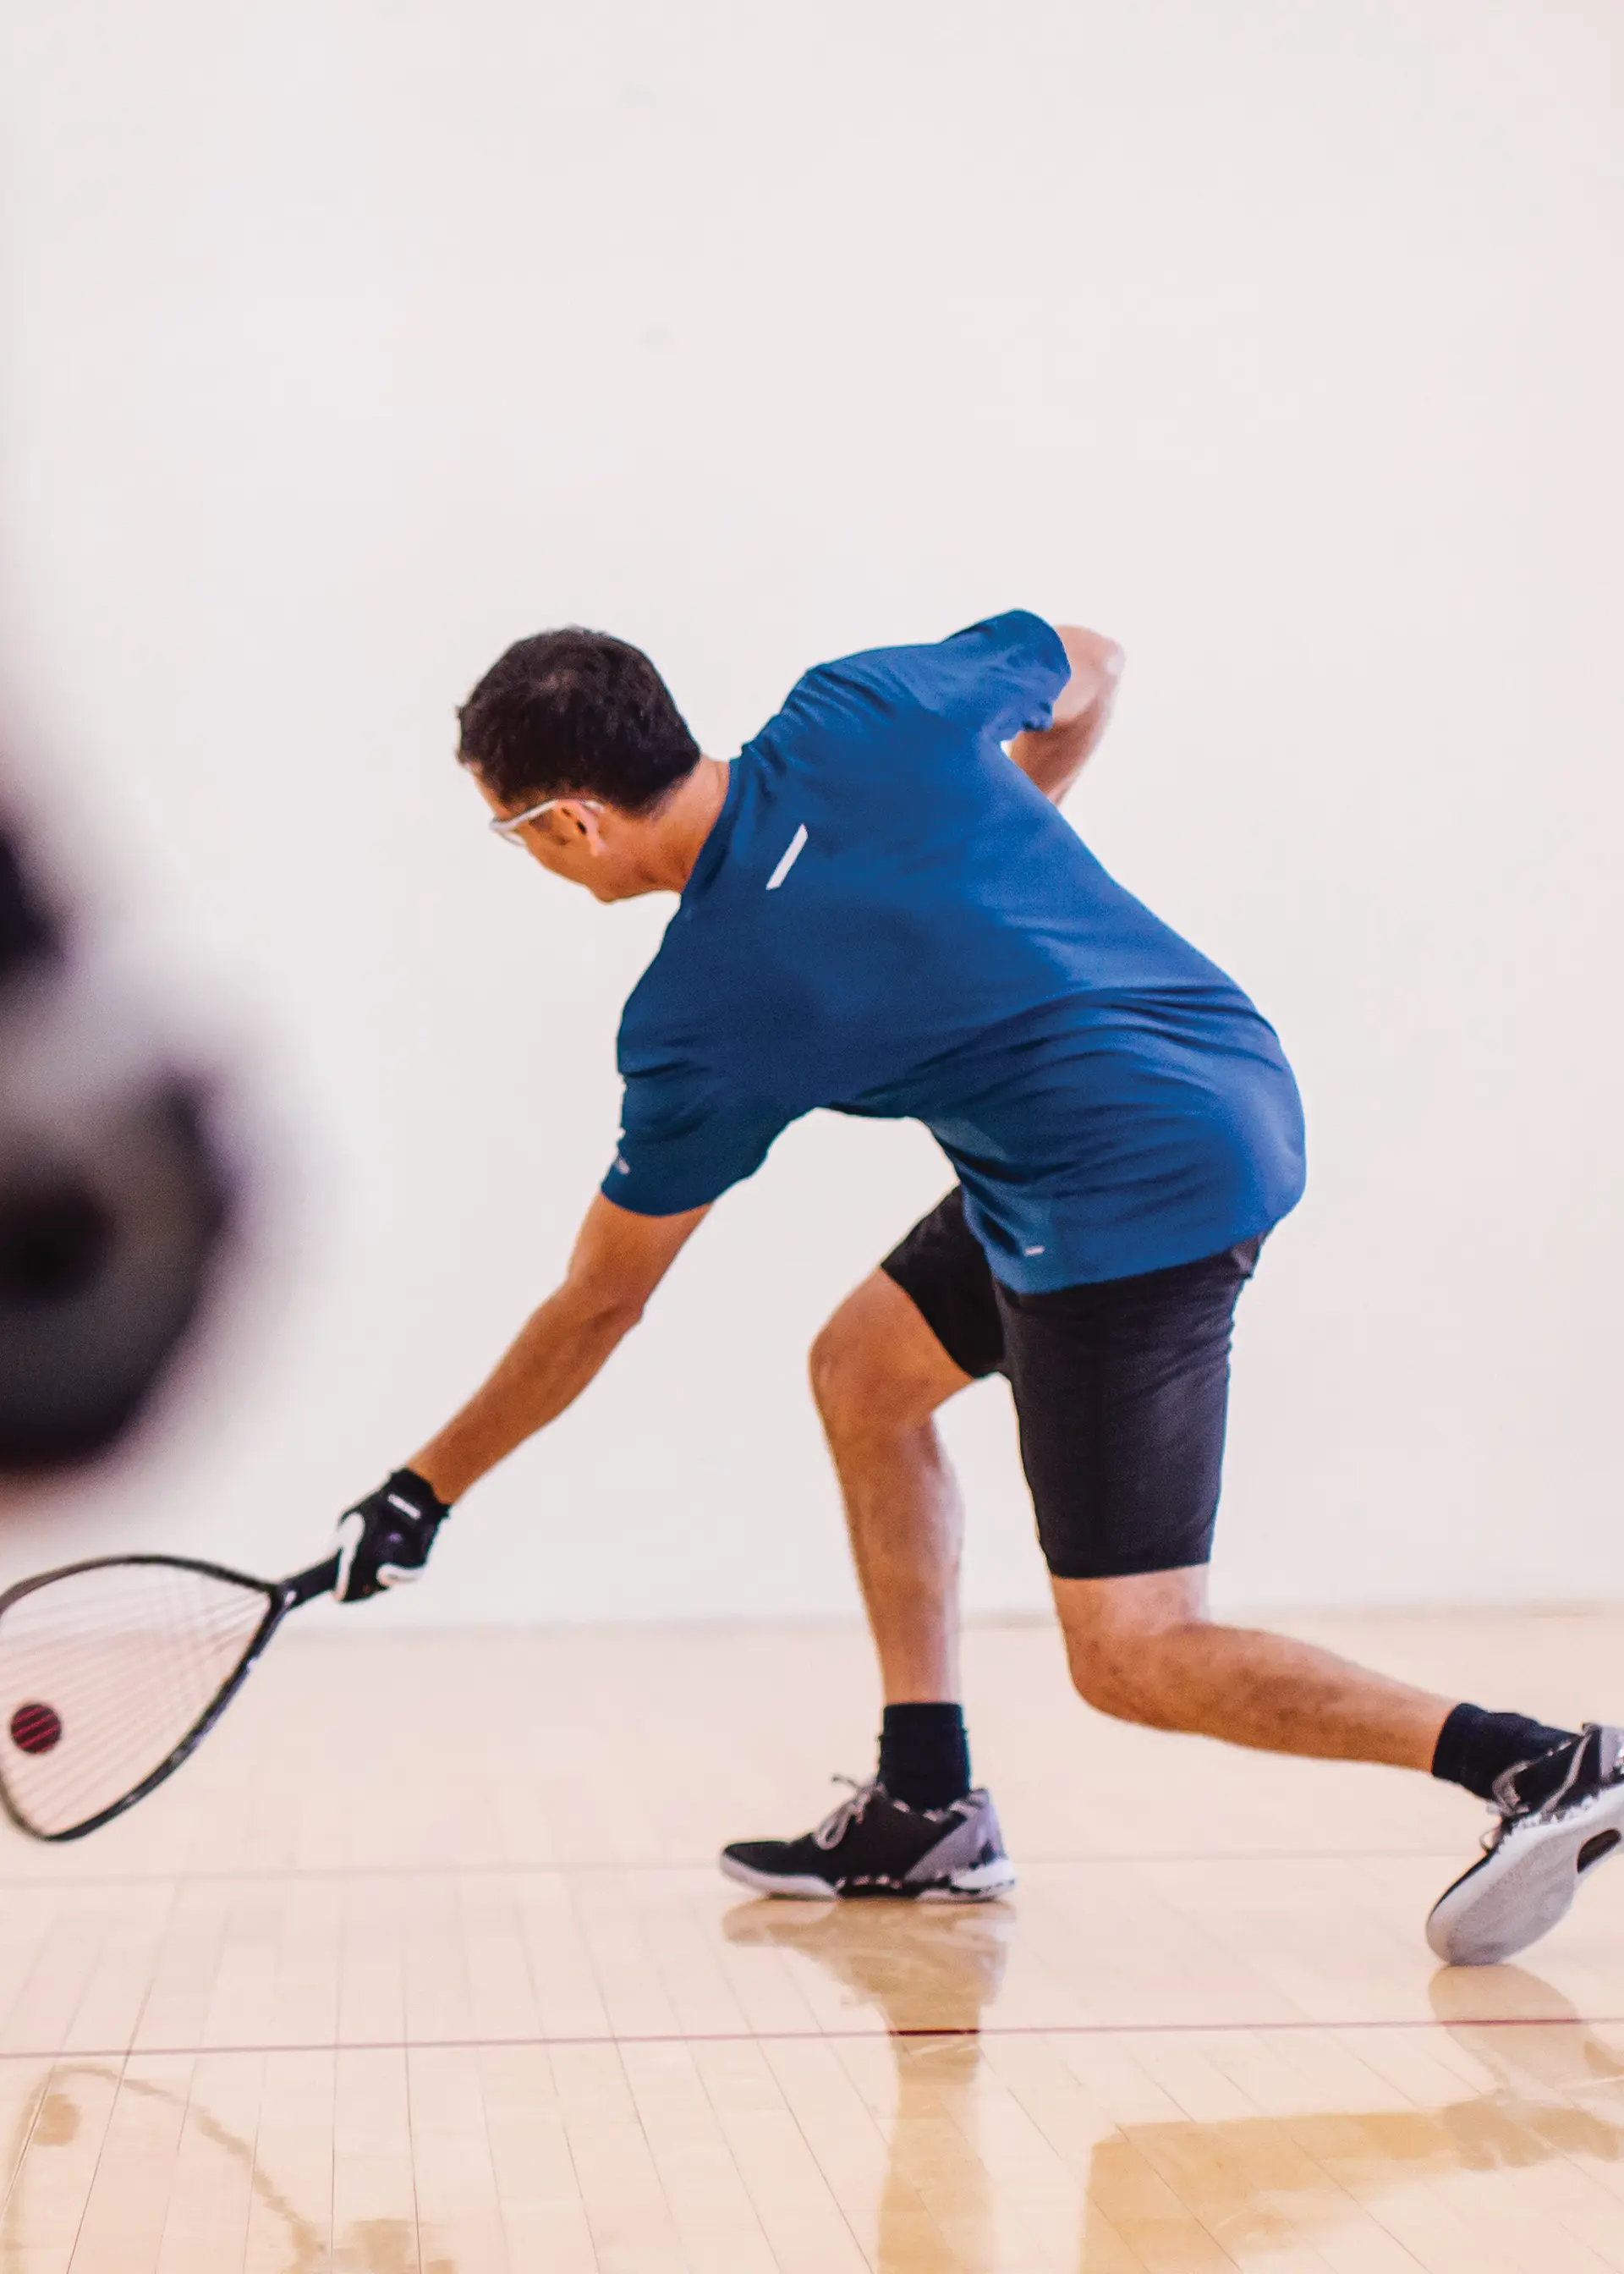 A person playing squash and reaching for a ball on an indoor court.